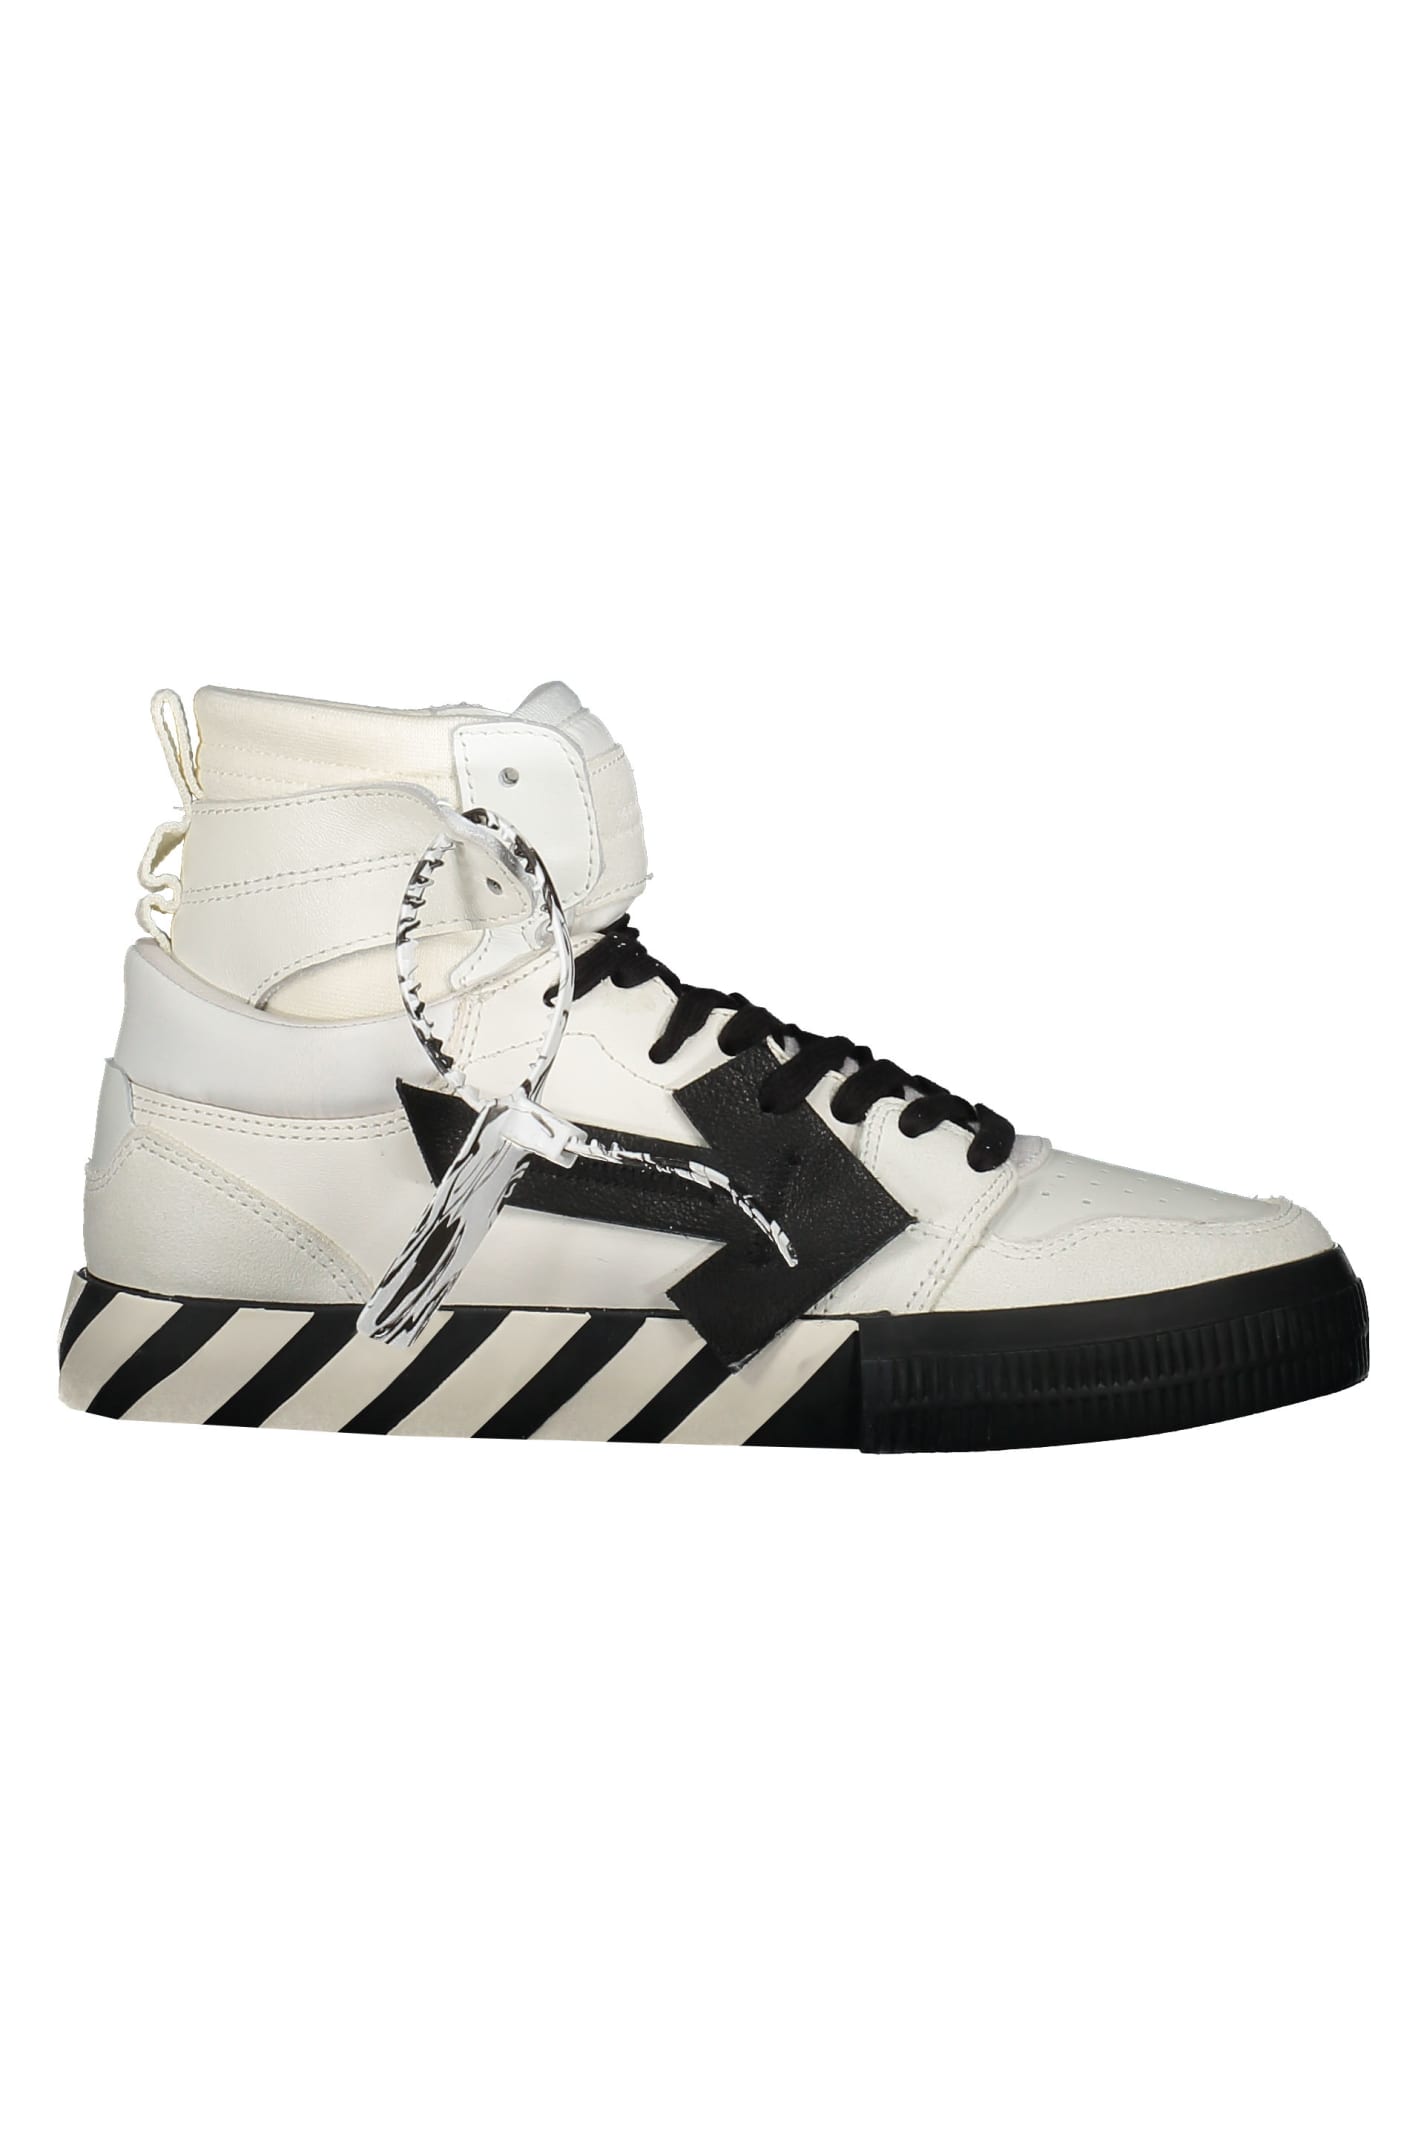 Shop Off-White Vulcanized High-Top Leather Sneakers